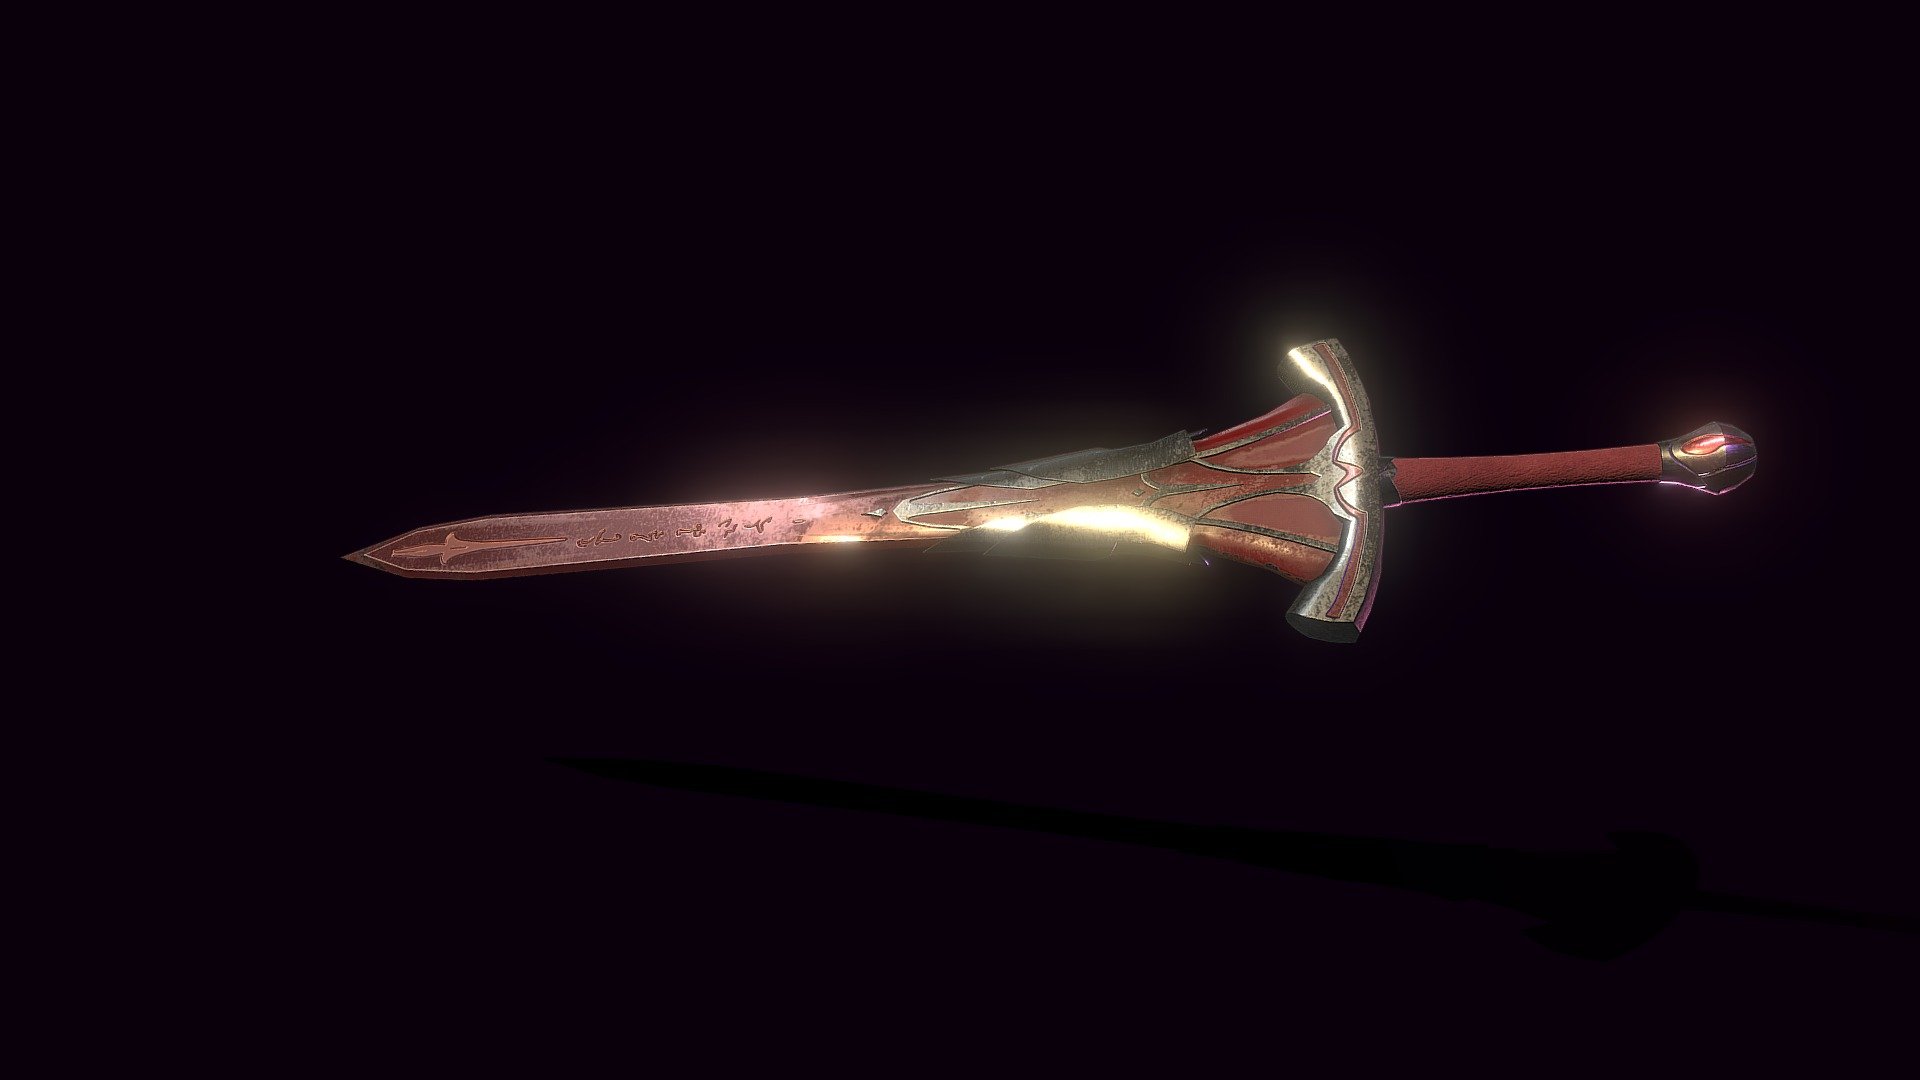 Clarent sword of Mordred from the Fate franchise with a more realistic style. 
Modeled in 3Ds Max. 
Textures made with Photoshop and Substance Painter 3d model